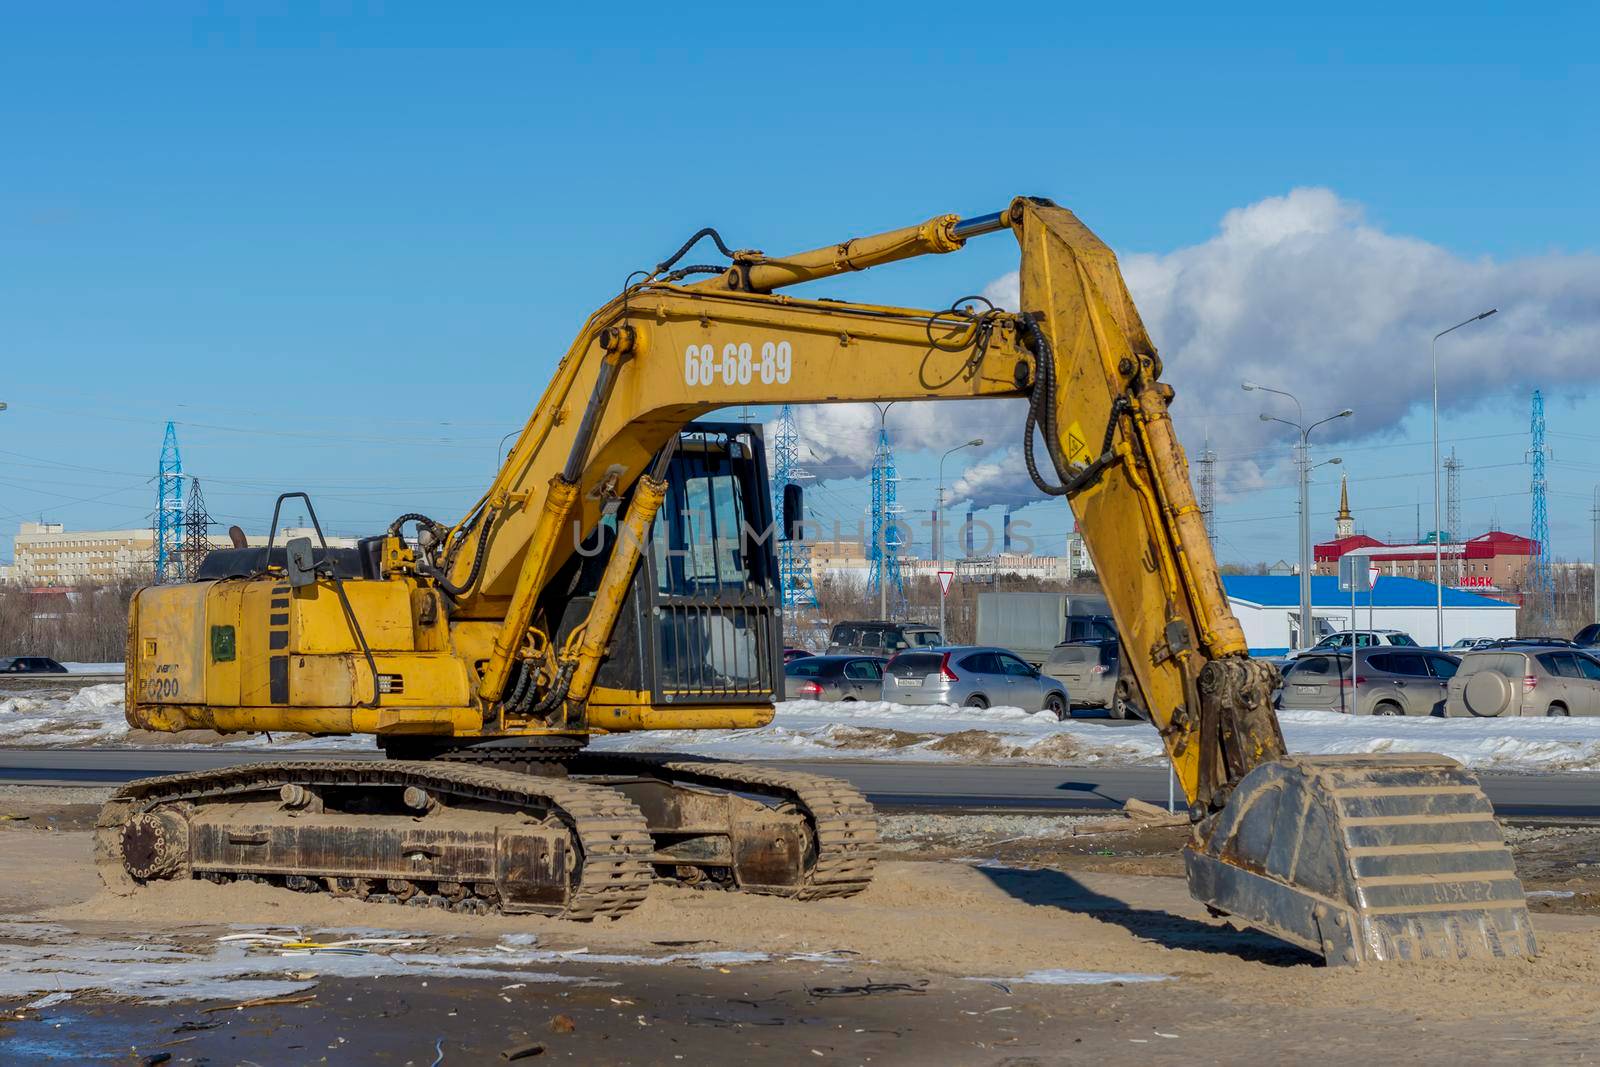 Yellow excavator or Bulldozers in town. Surgut, Russia - 20 April, 2021. by Essffes